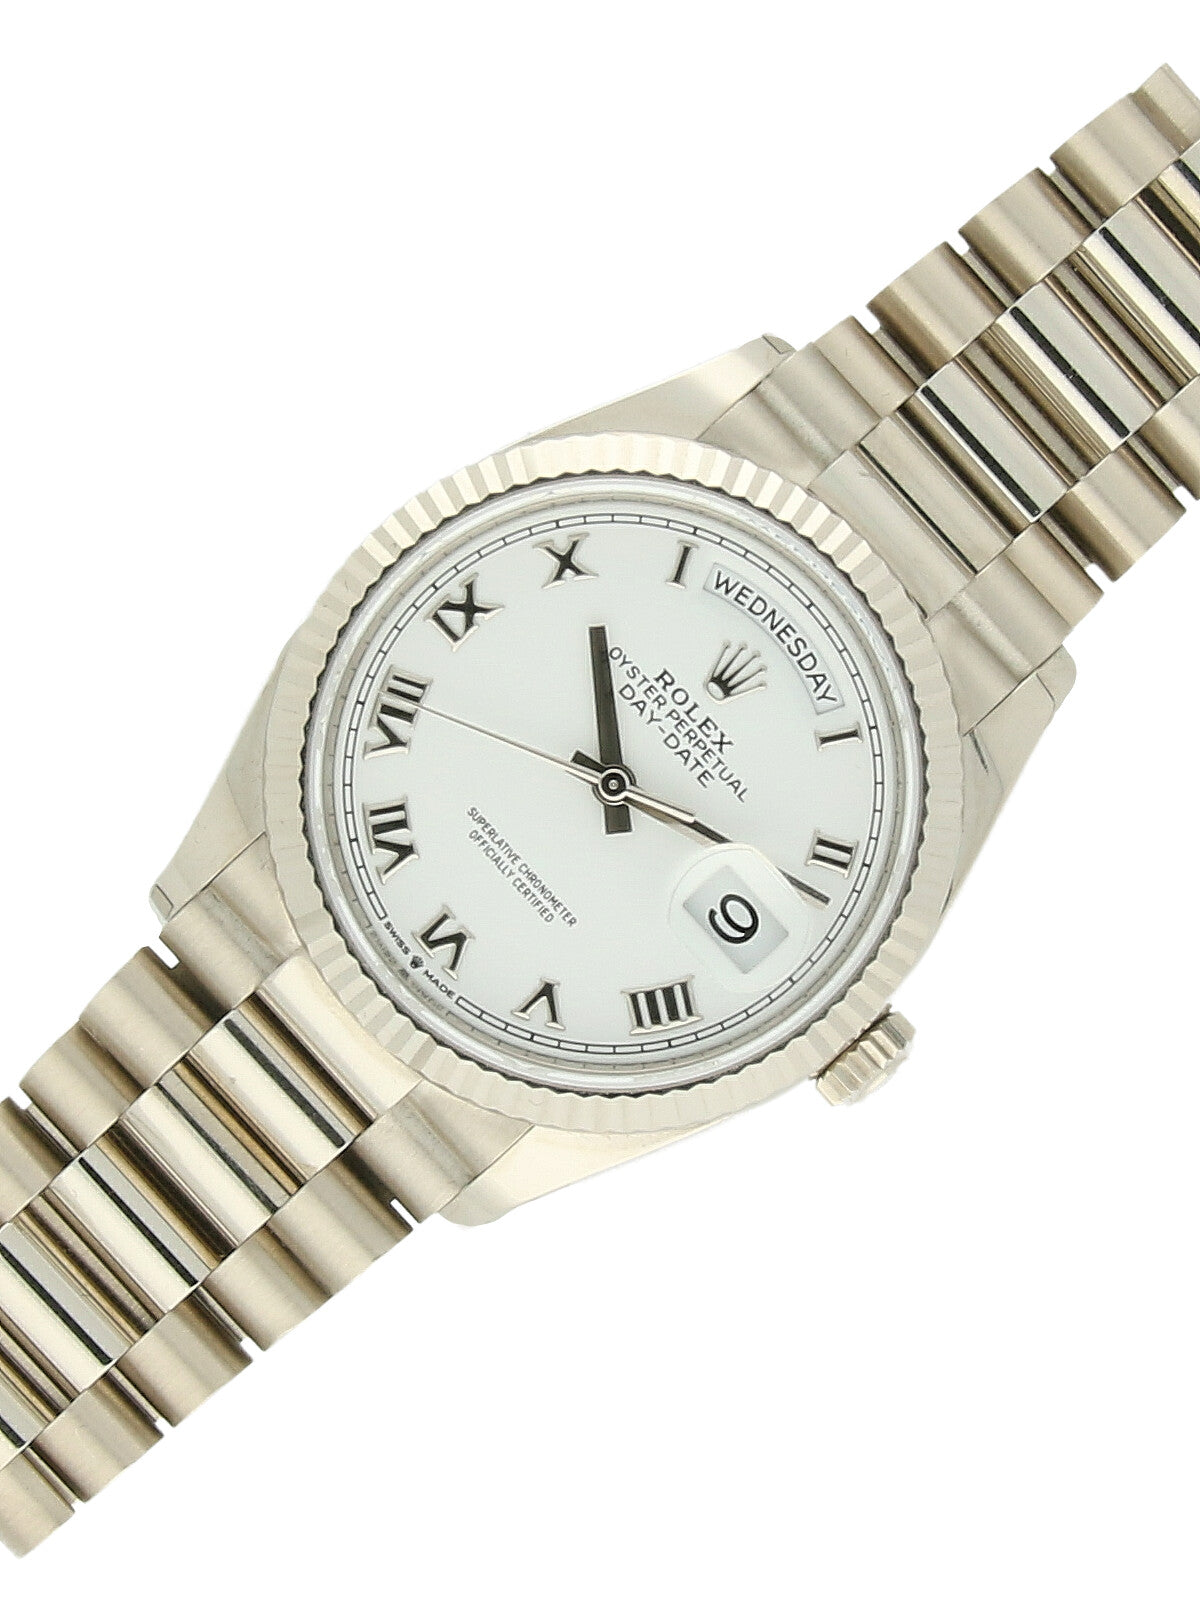 Pre Owned Rolex Day-Date 18ct White Gold Automatic 36mm Watch on President Bracelet